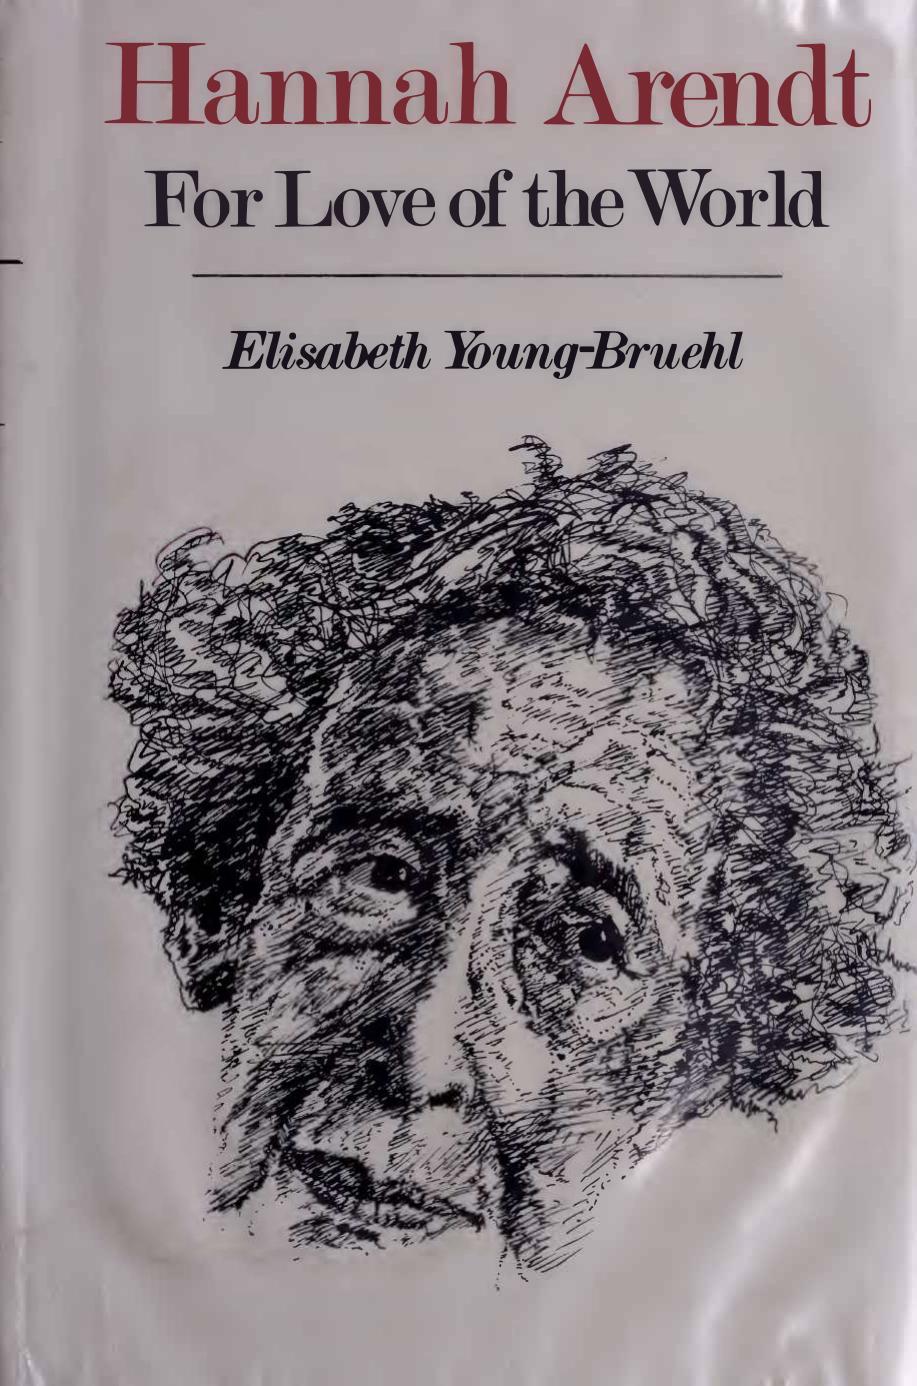 Hannah Arendt - For Love of World by Elisabeth Young-Bruehl